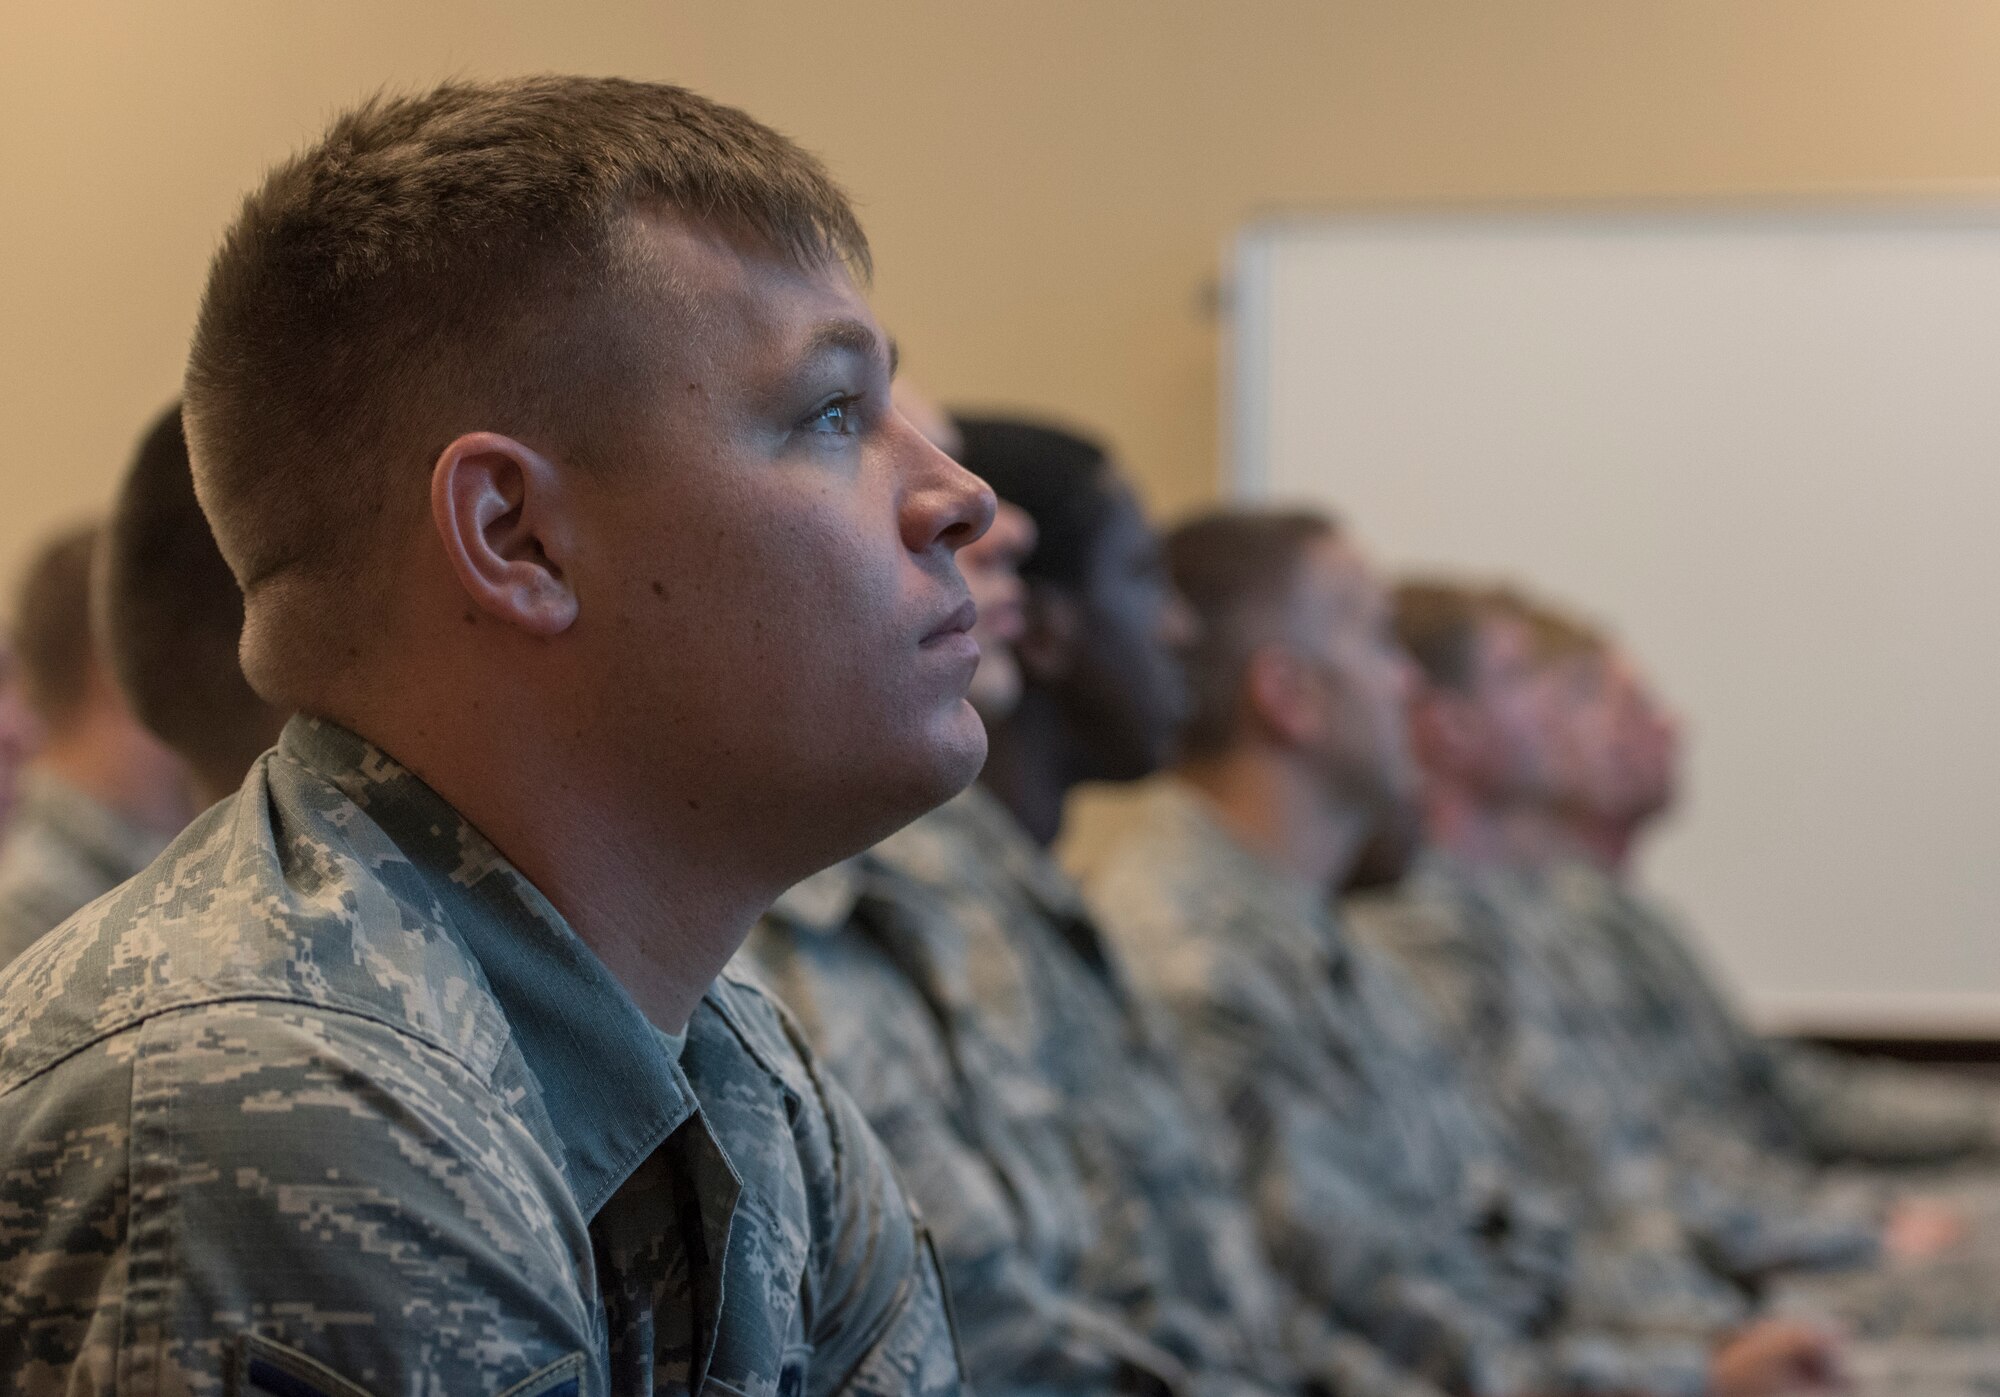 An Airman from the 33rd Aircraft Maintenance Squadron listens during an Operational Safety Review briefing May 18, 2018, at Eglin Air Force Base, Fla. The Operational Safety Review was briefed in a large forum and then broken down into smaller groups for open discussion. (U.S. Air Force photo by Airman 1st Class Emily Smallwood)